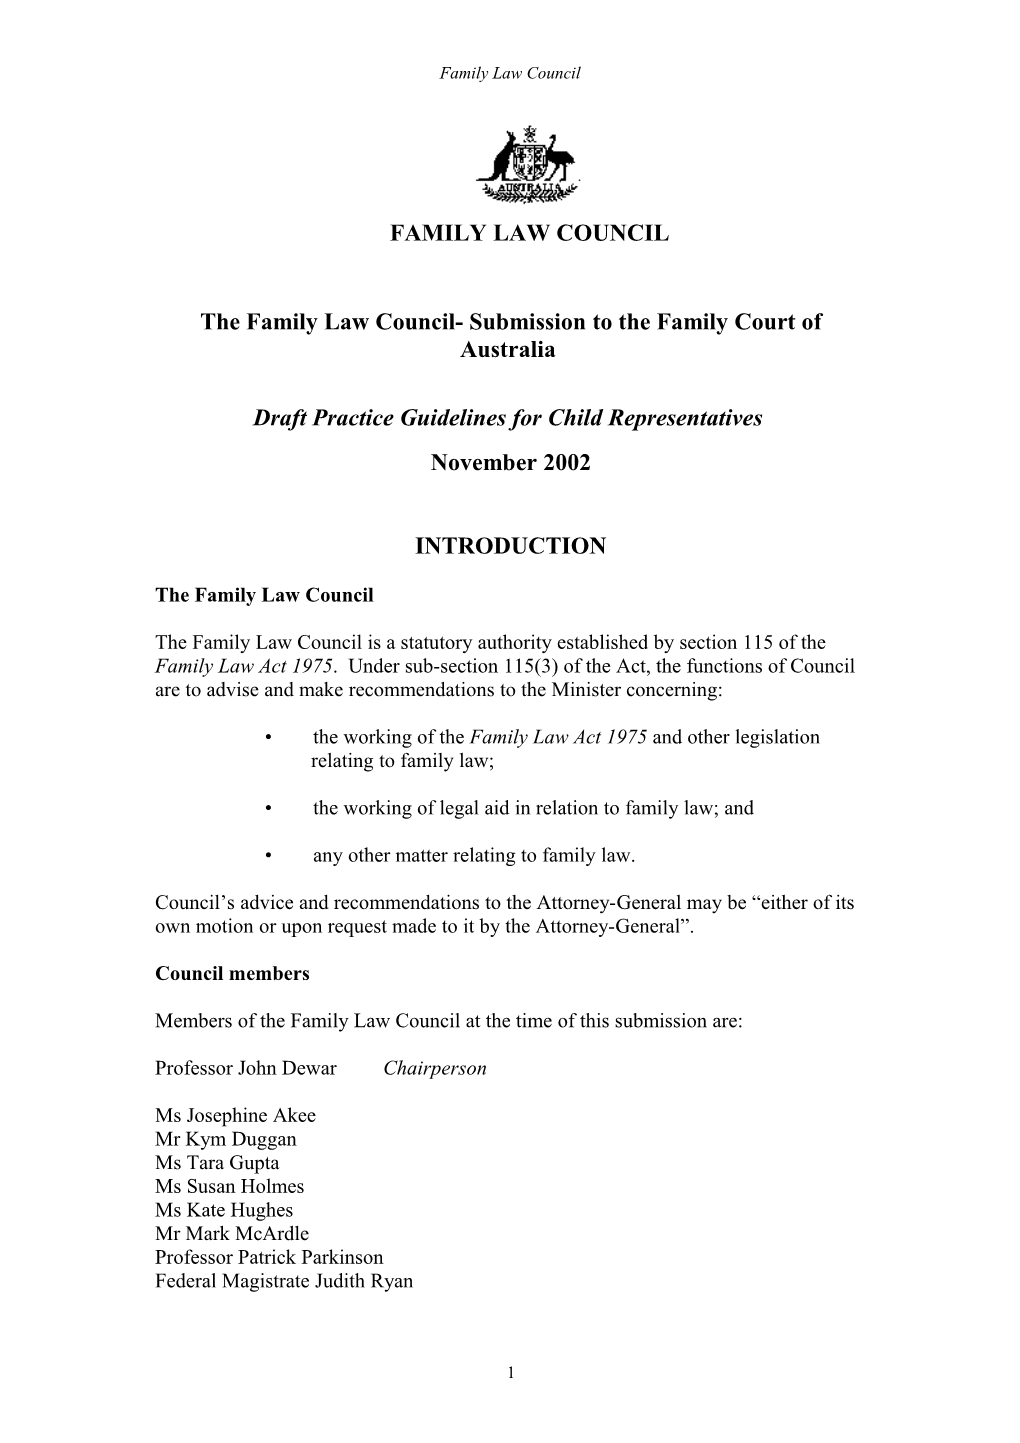 Submission to the Family Law Court on Draft Practice Guidelines for Child Representatives